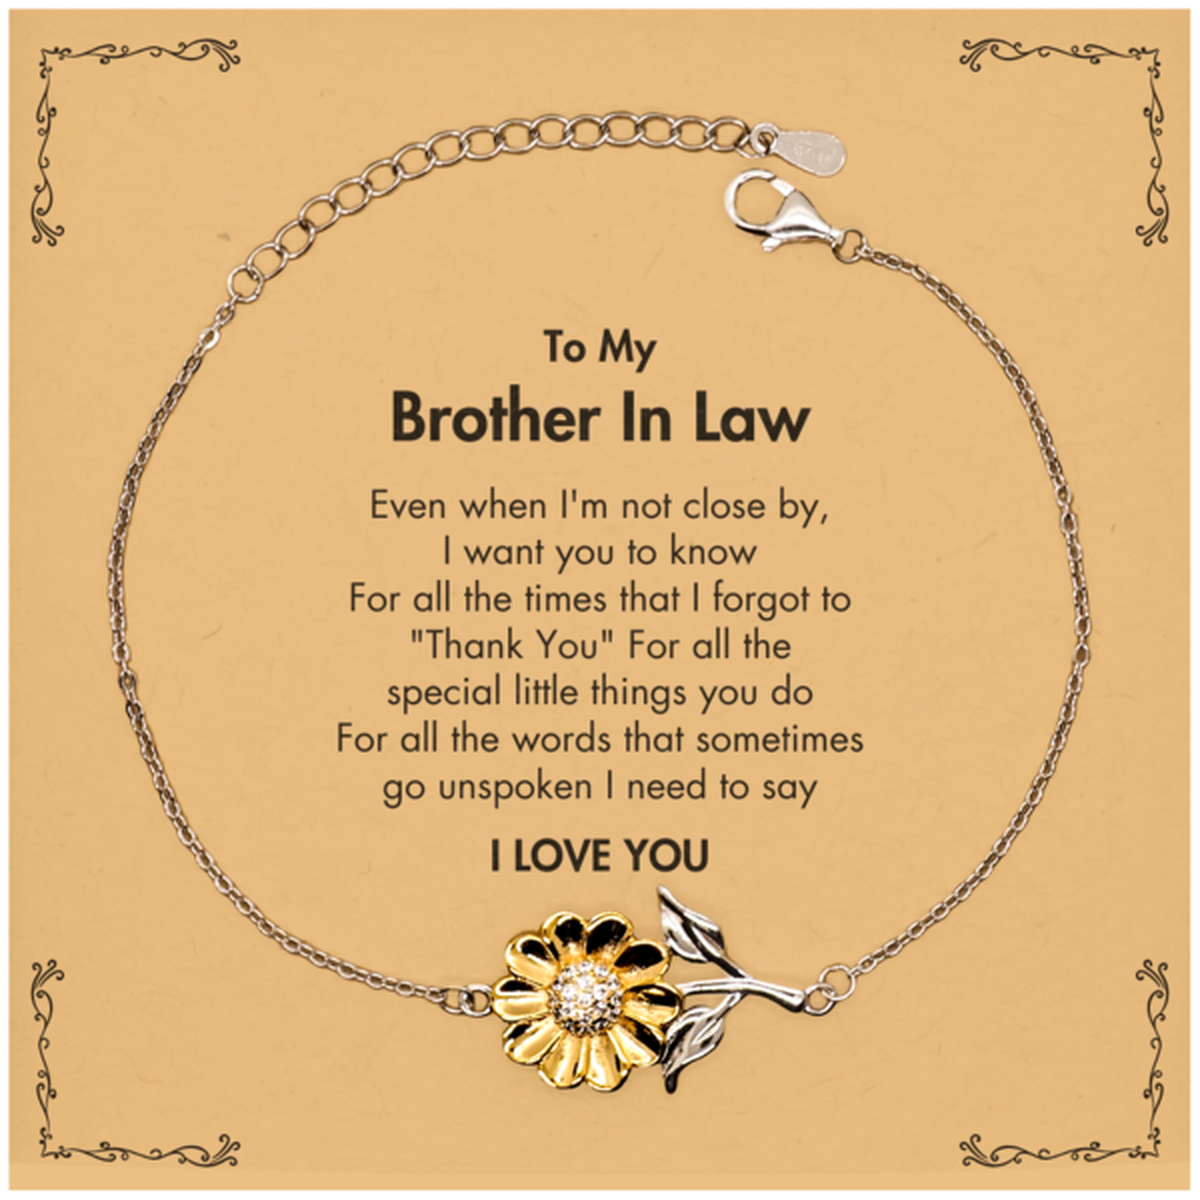 Thank You Gifts for Brother In Law, Keepsake Sunflower Bracelet Gifts for Brother In Law Birthday Mother's day Father's Day Brother In Law For all the words That sometimes go unspoken I need to say I LOVE YOU